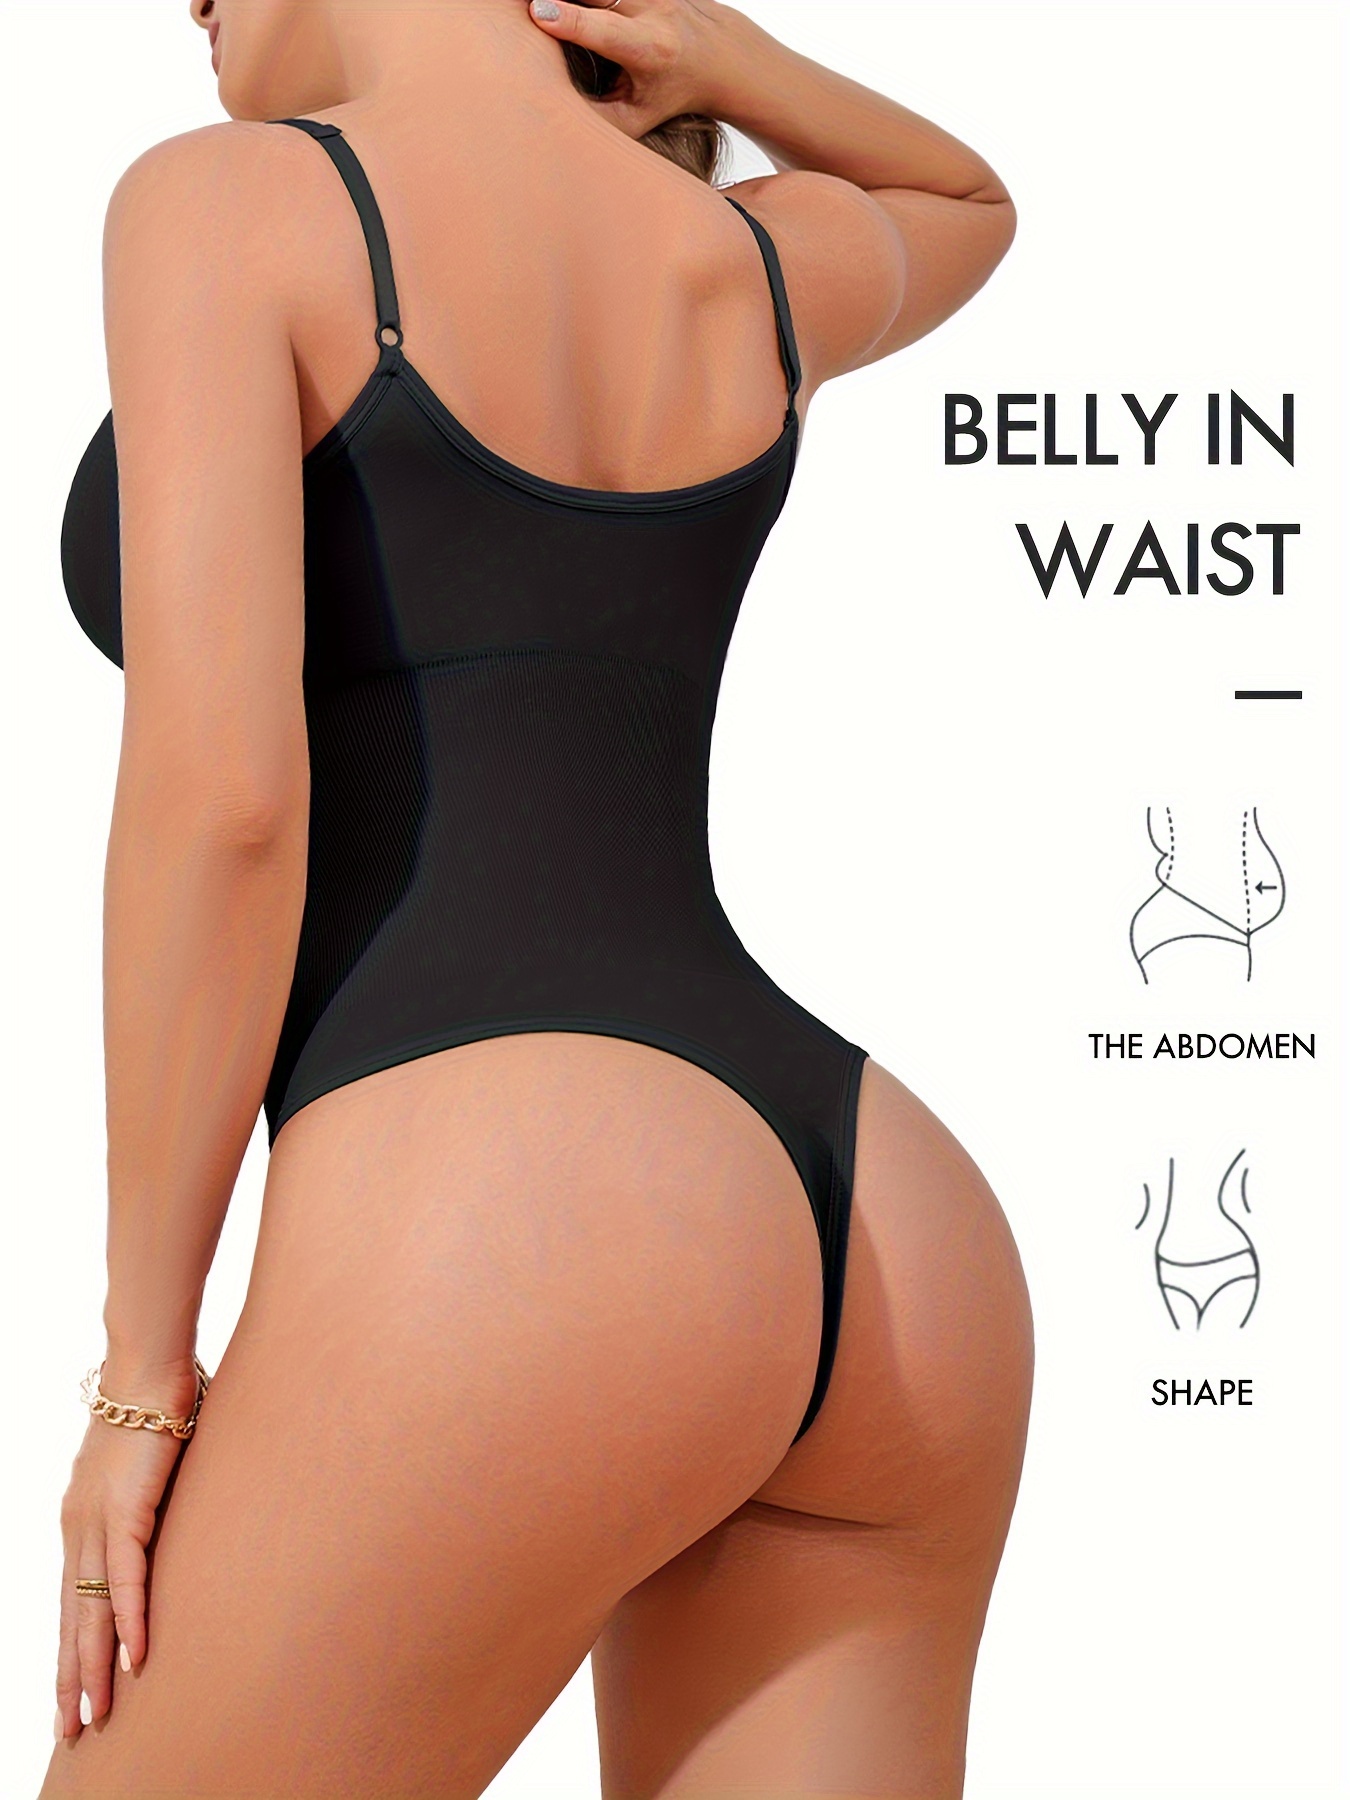 Female Body Shaper, Adults Solid Color One-Piece Shapewear Corset